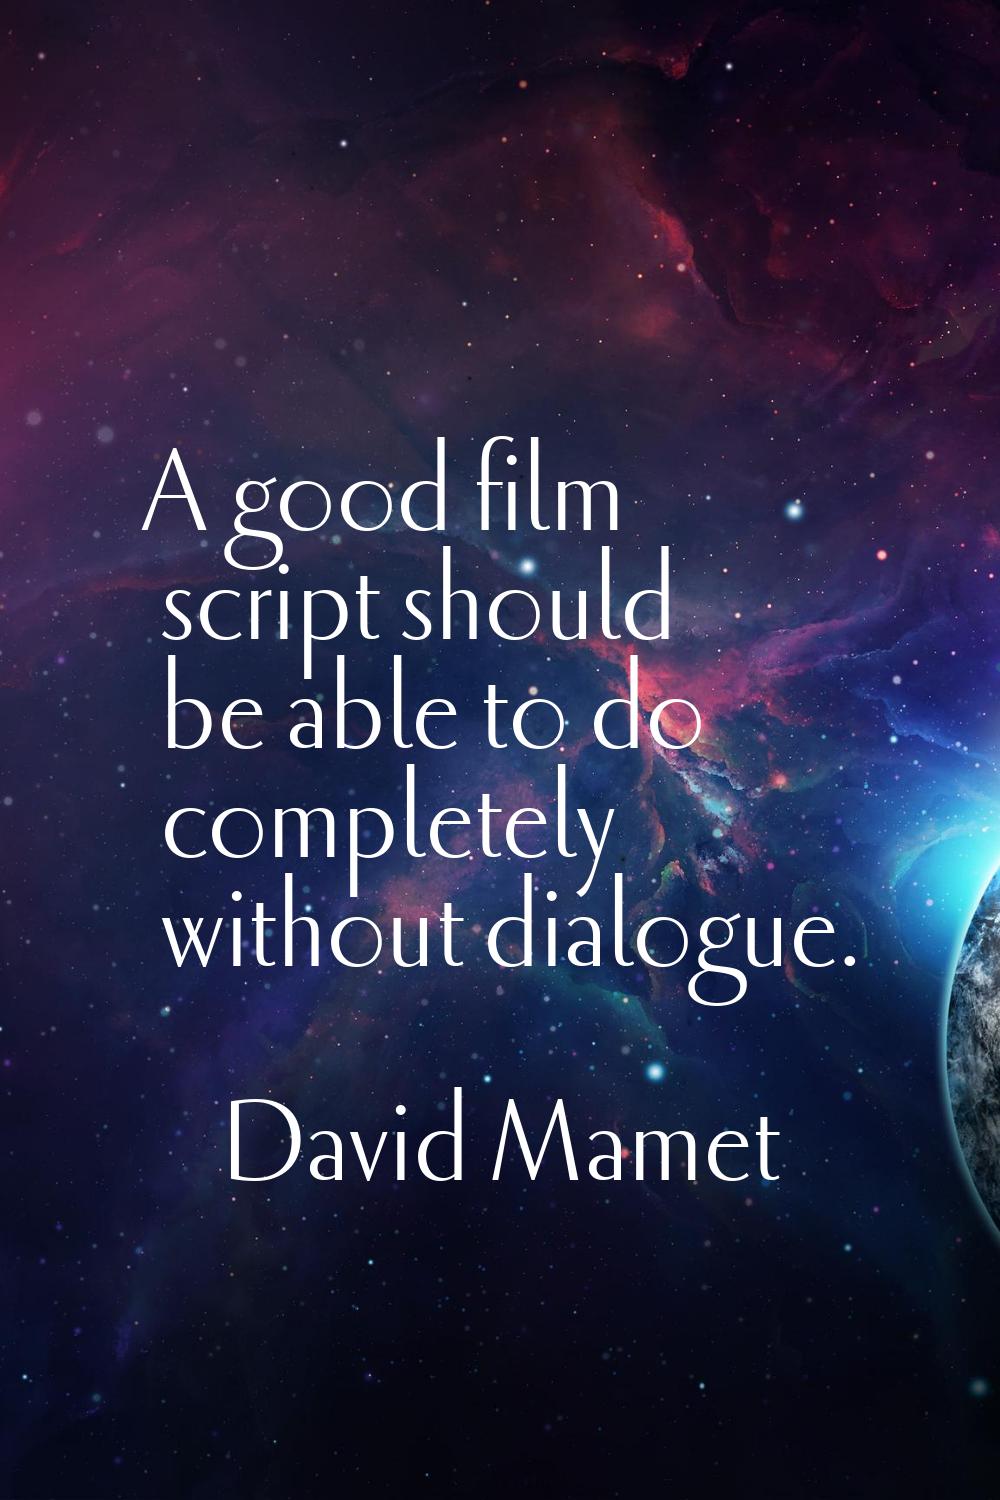 A good film script should be able to do completely without dialogue.